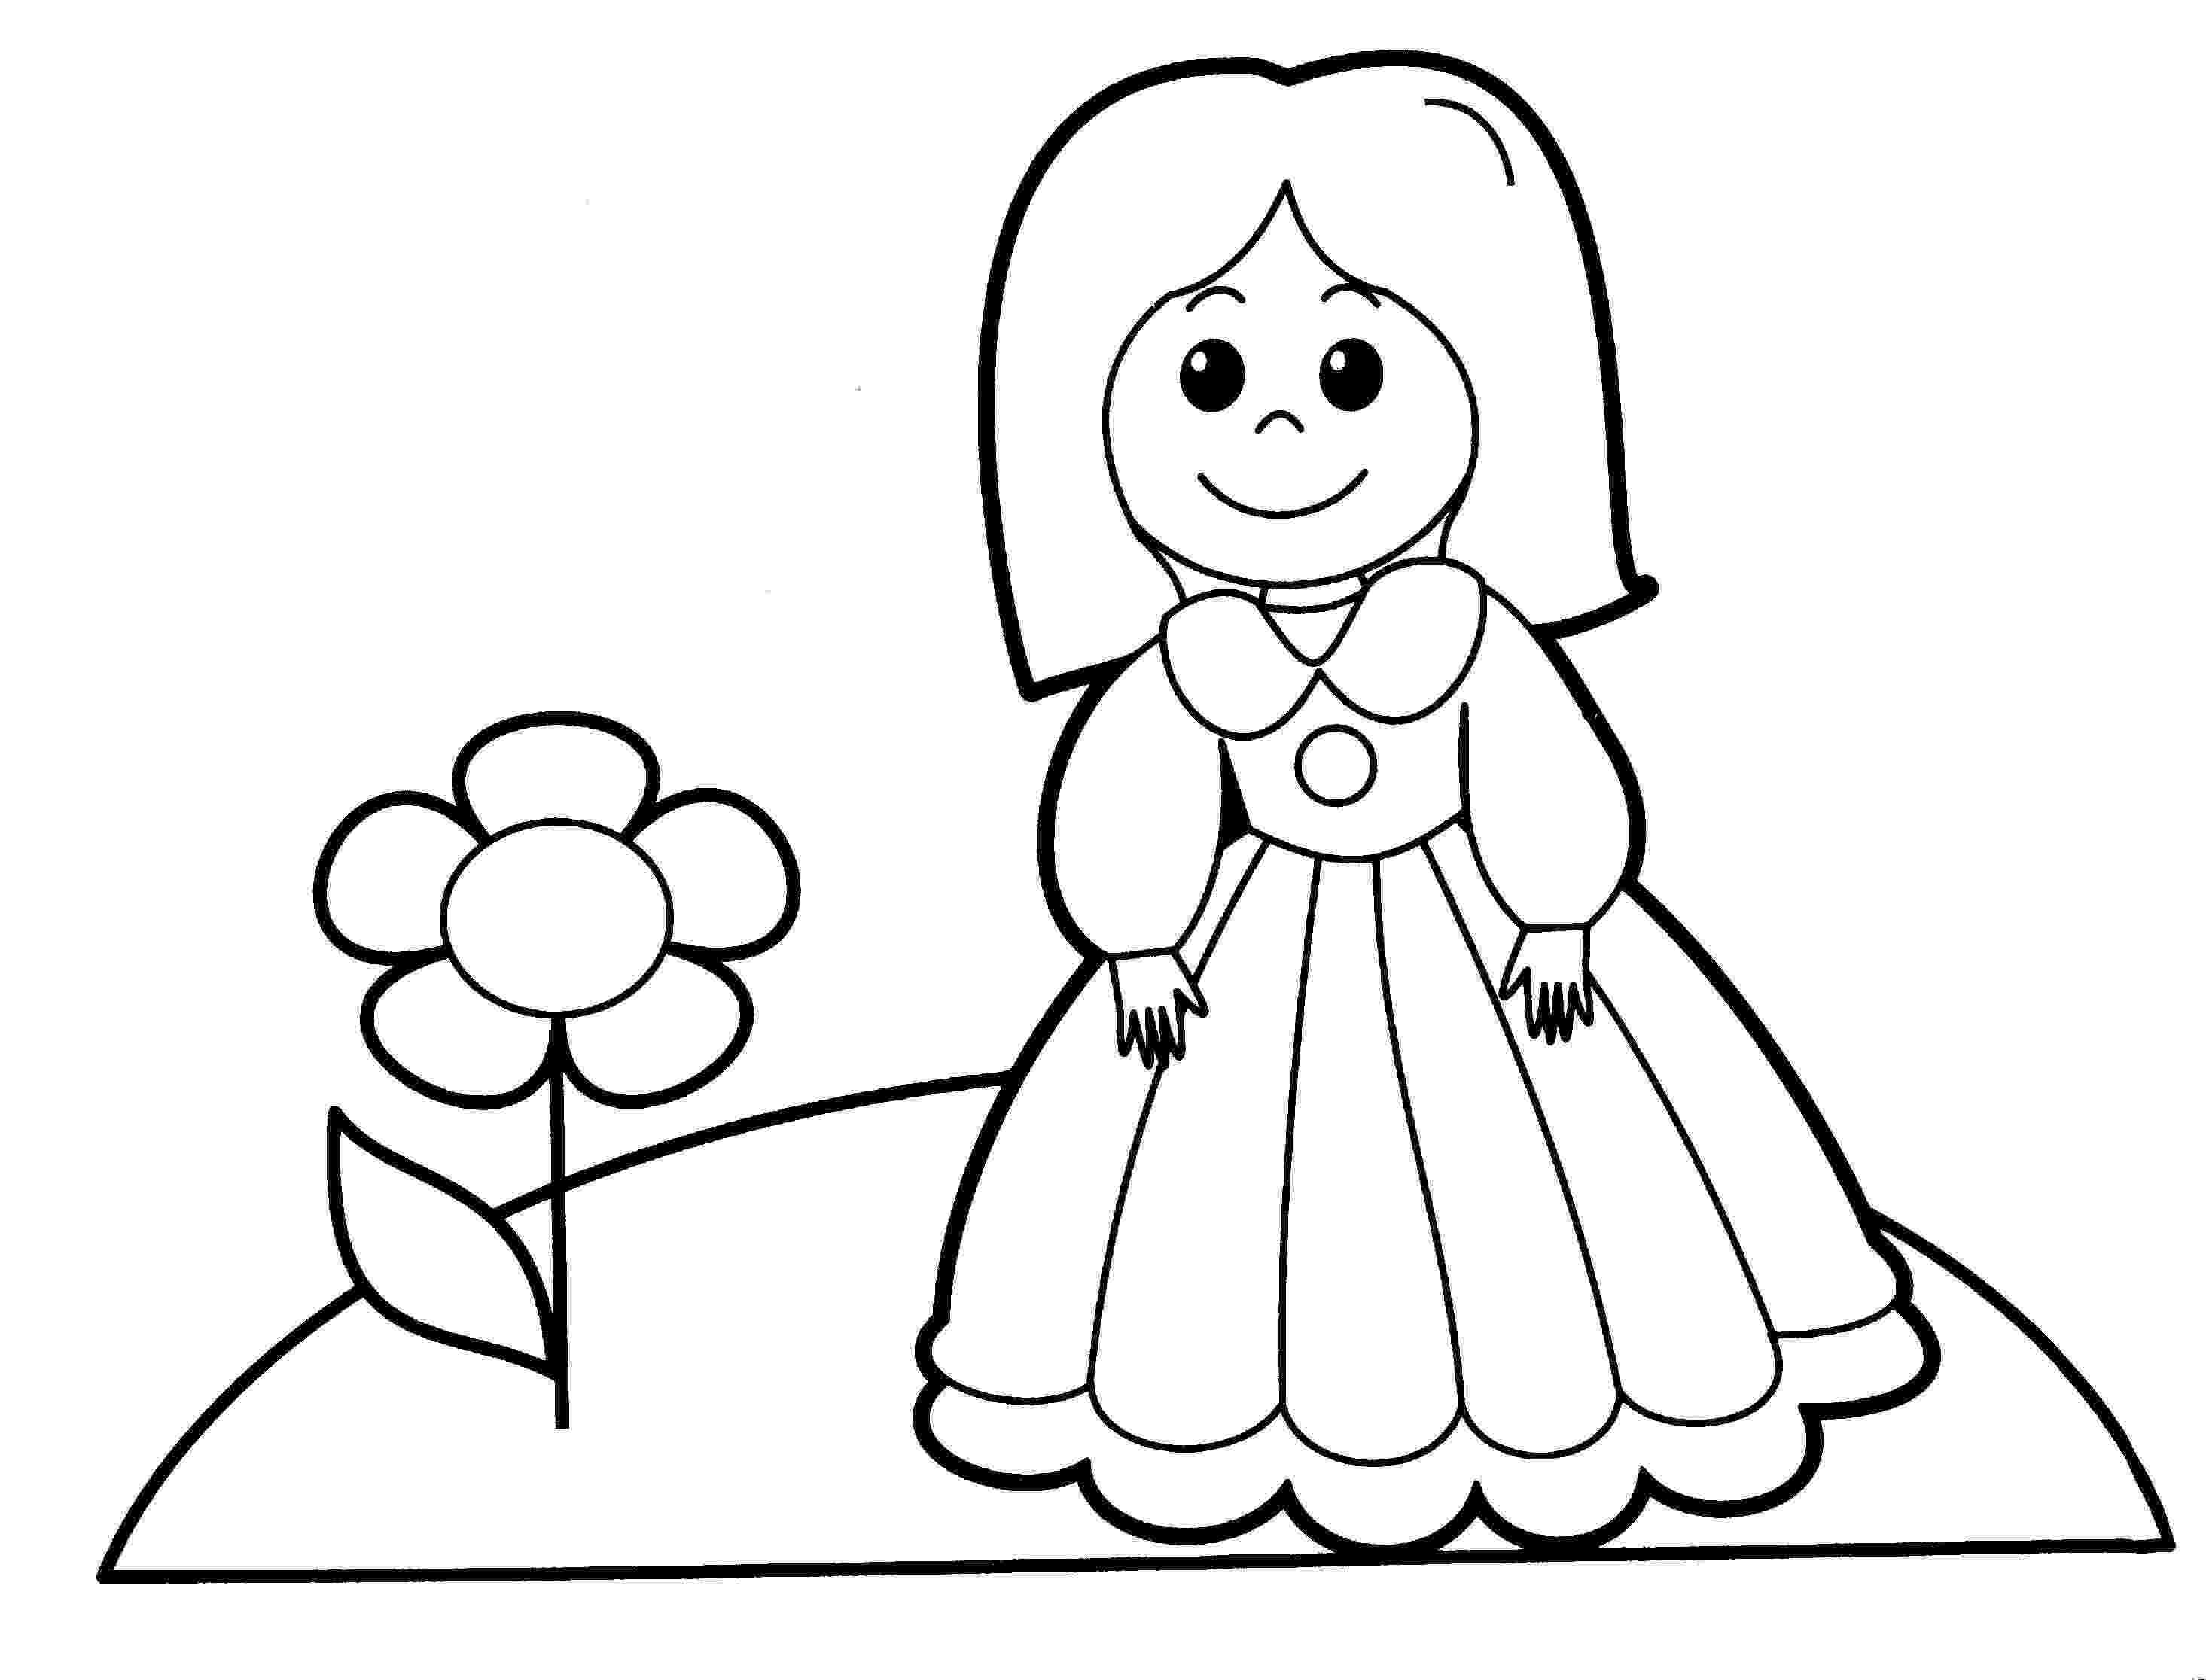 dolls coloring pages free printable baby doll coloring pages coloring home coloring dolls pages 